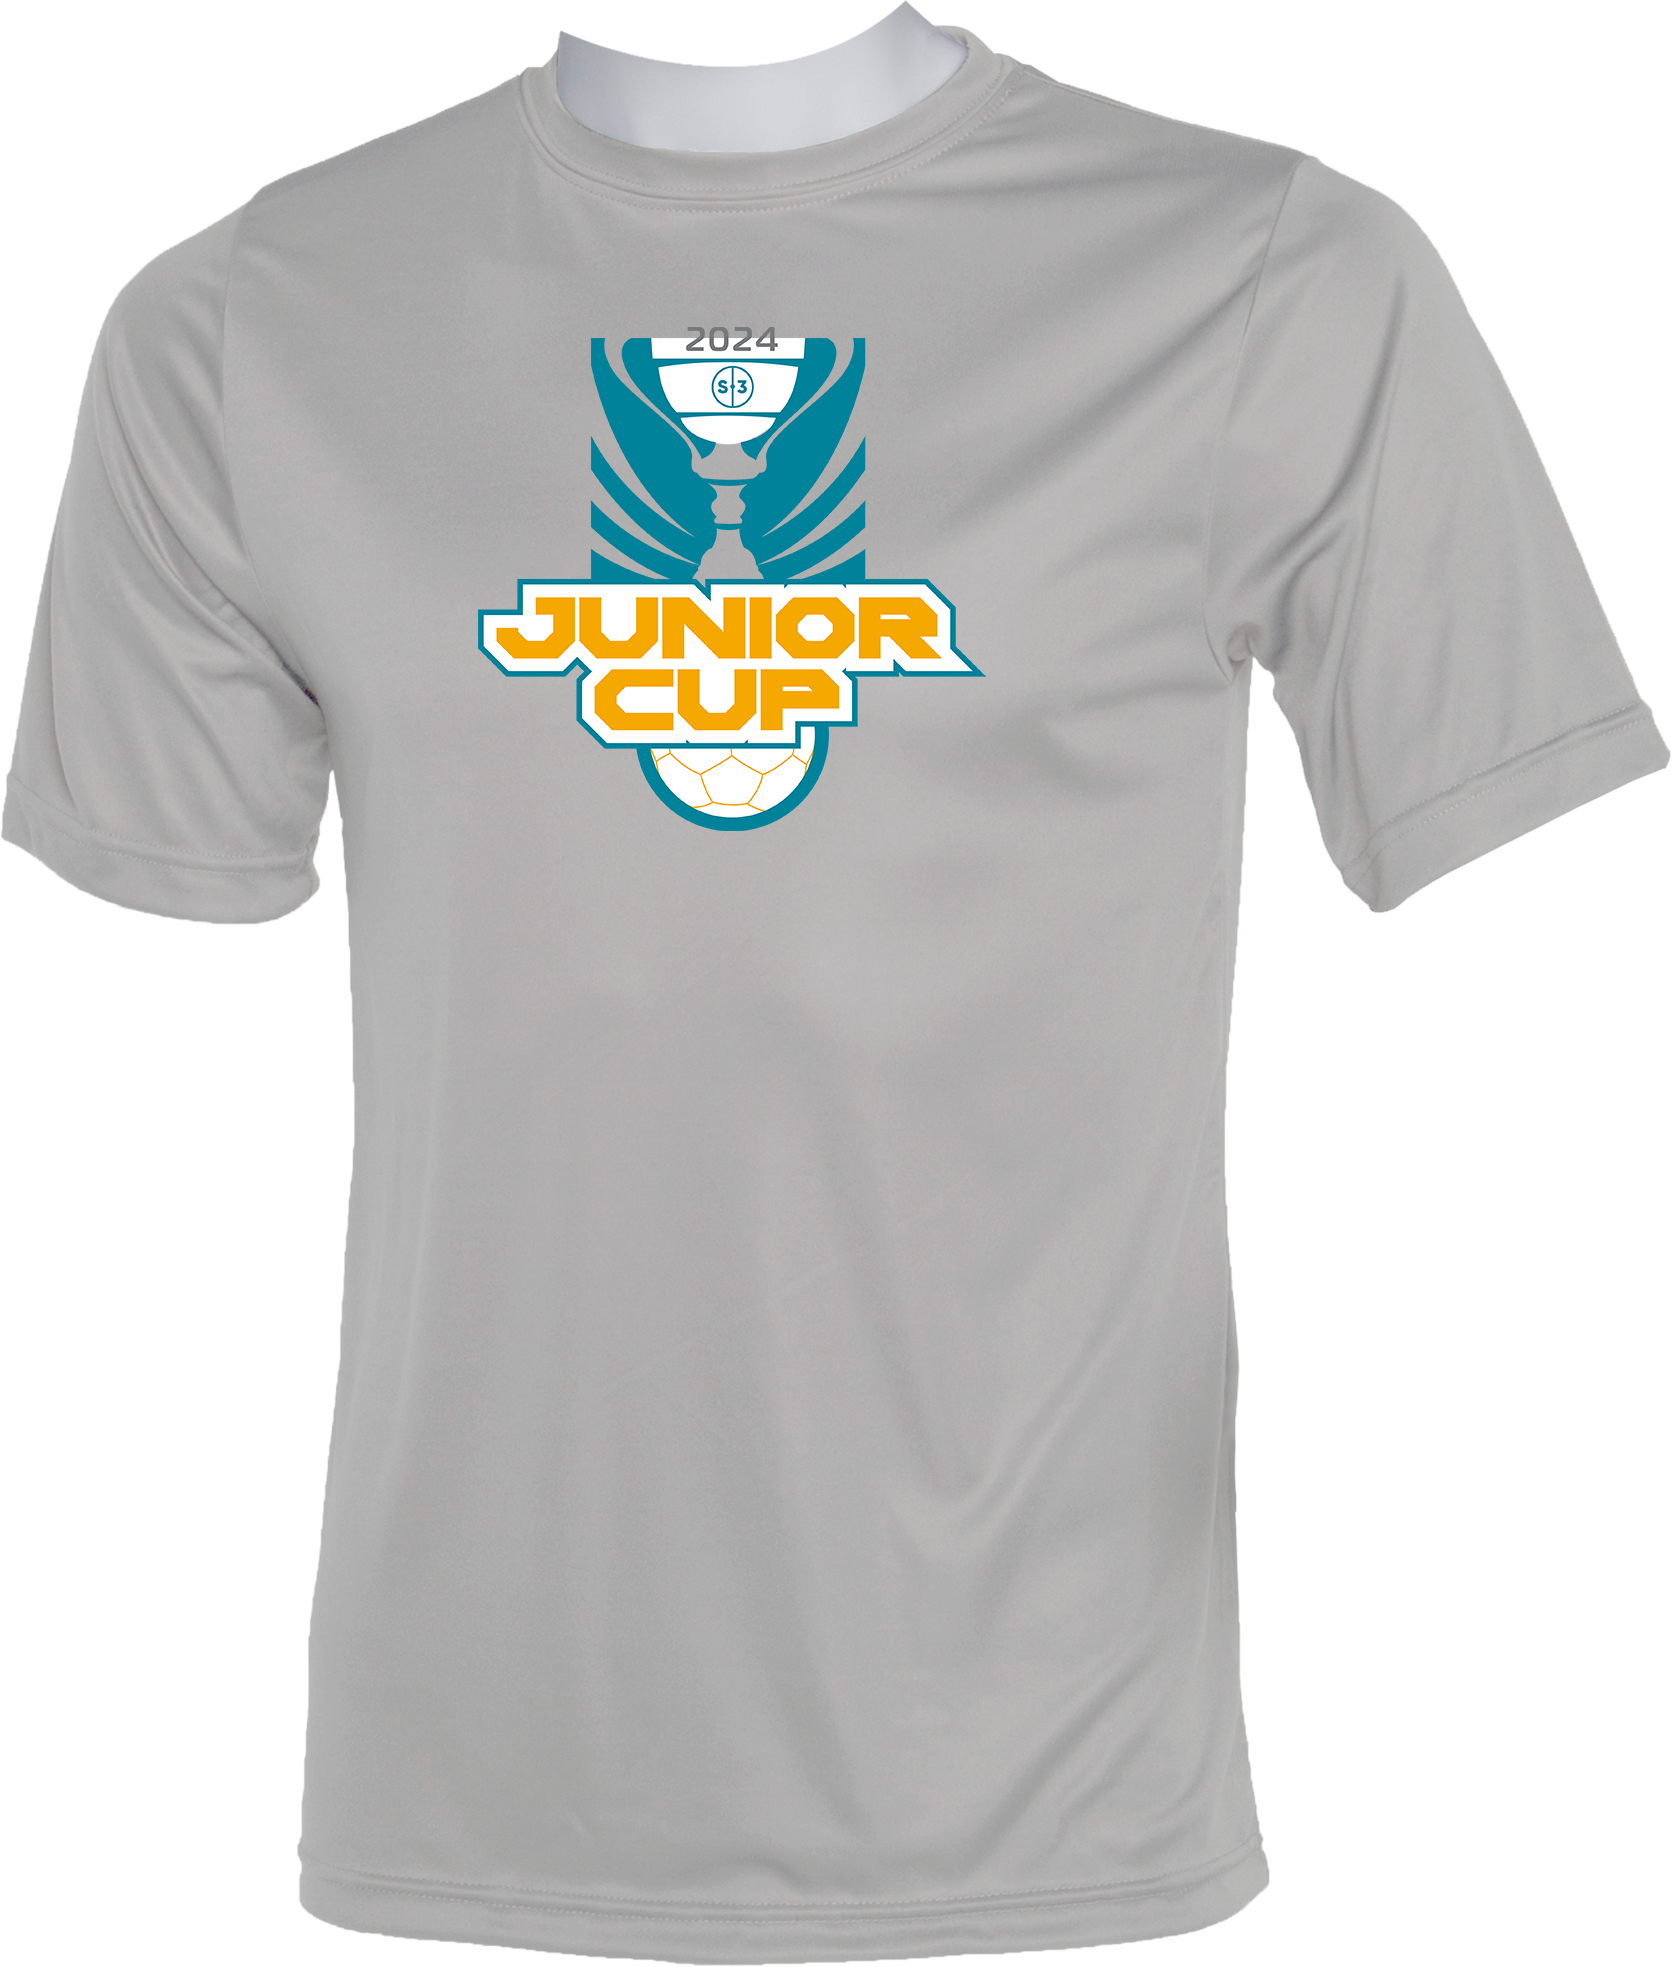 Performance Shirts - 2024 S3 Junior Cup